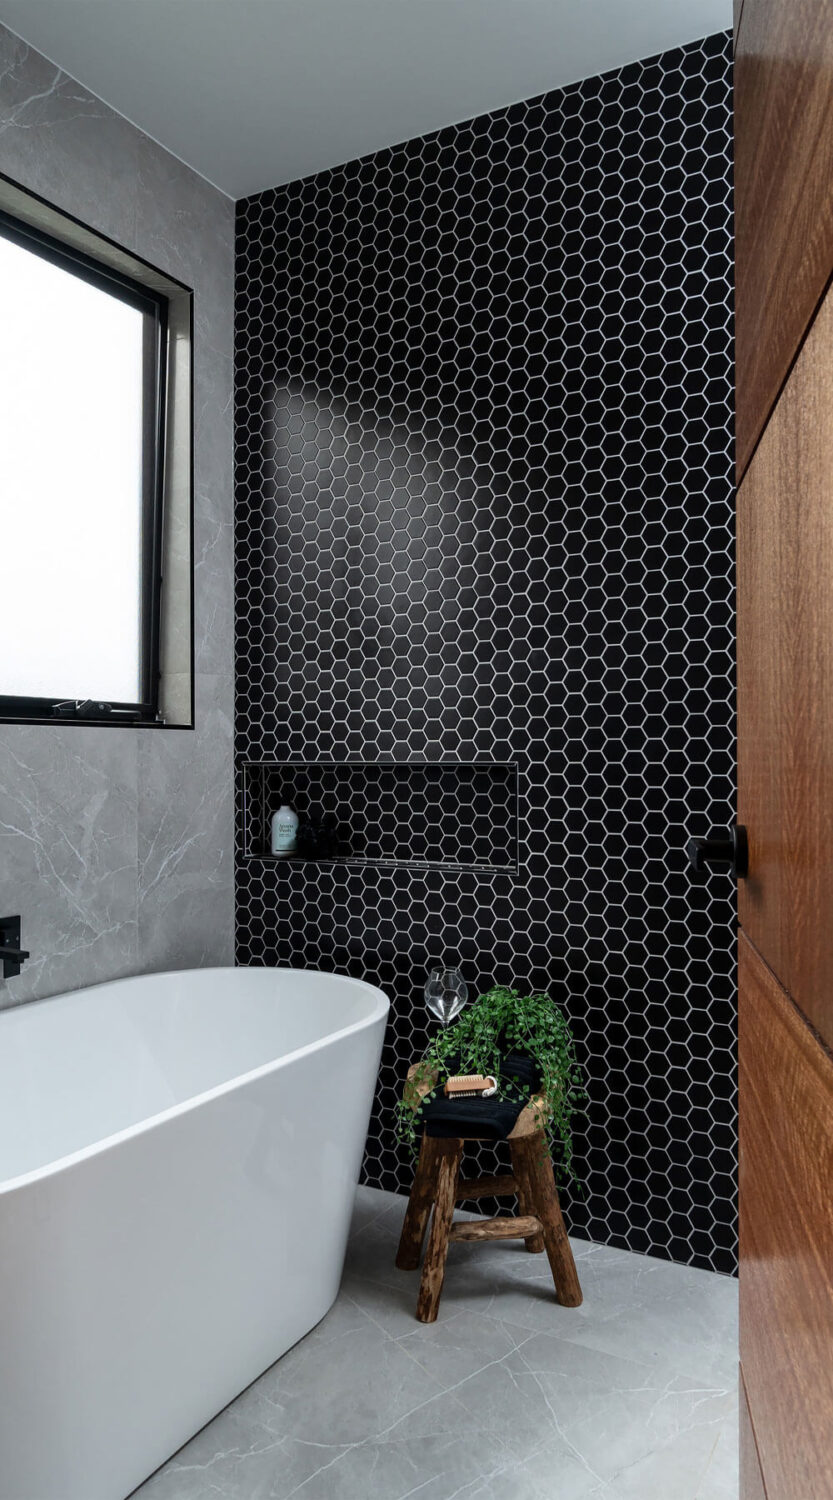 Hexagon pattern black and white wall tiles contrasted with gray marble floor and wall tiles.